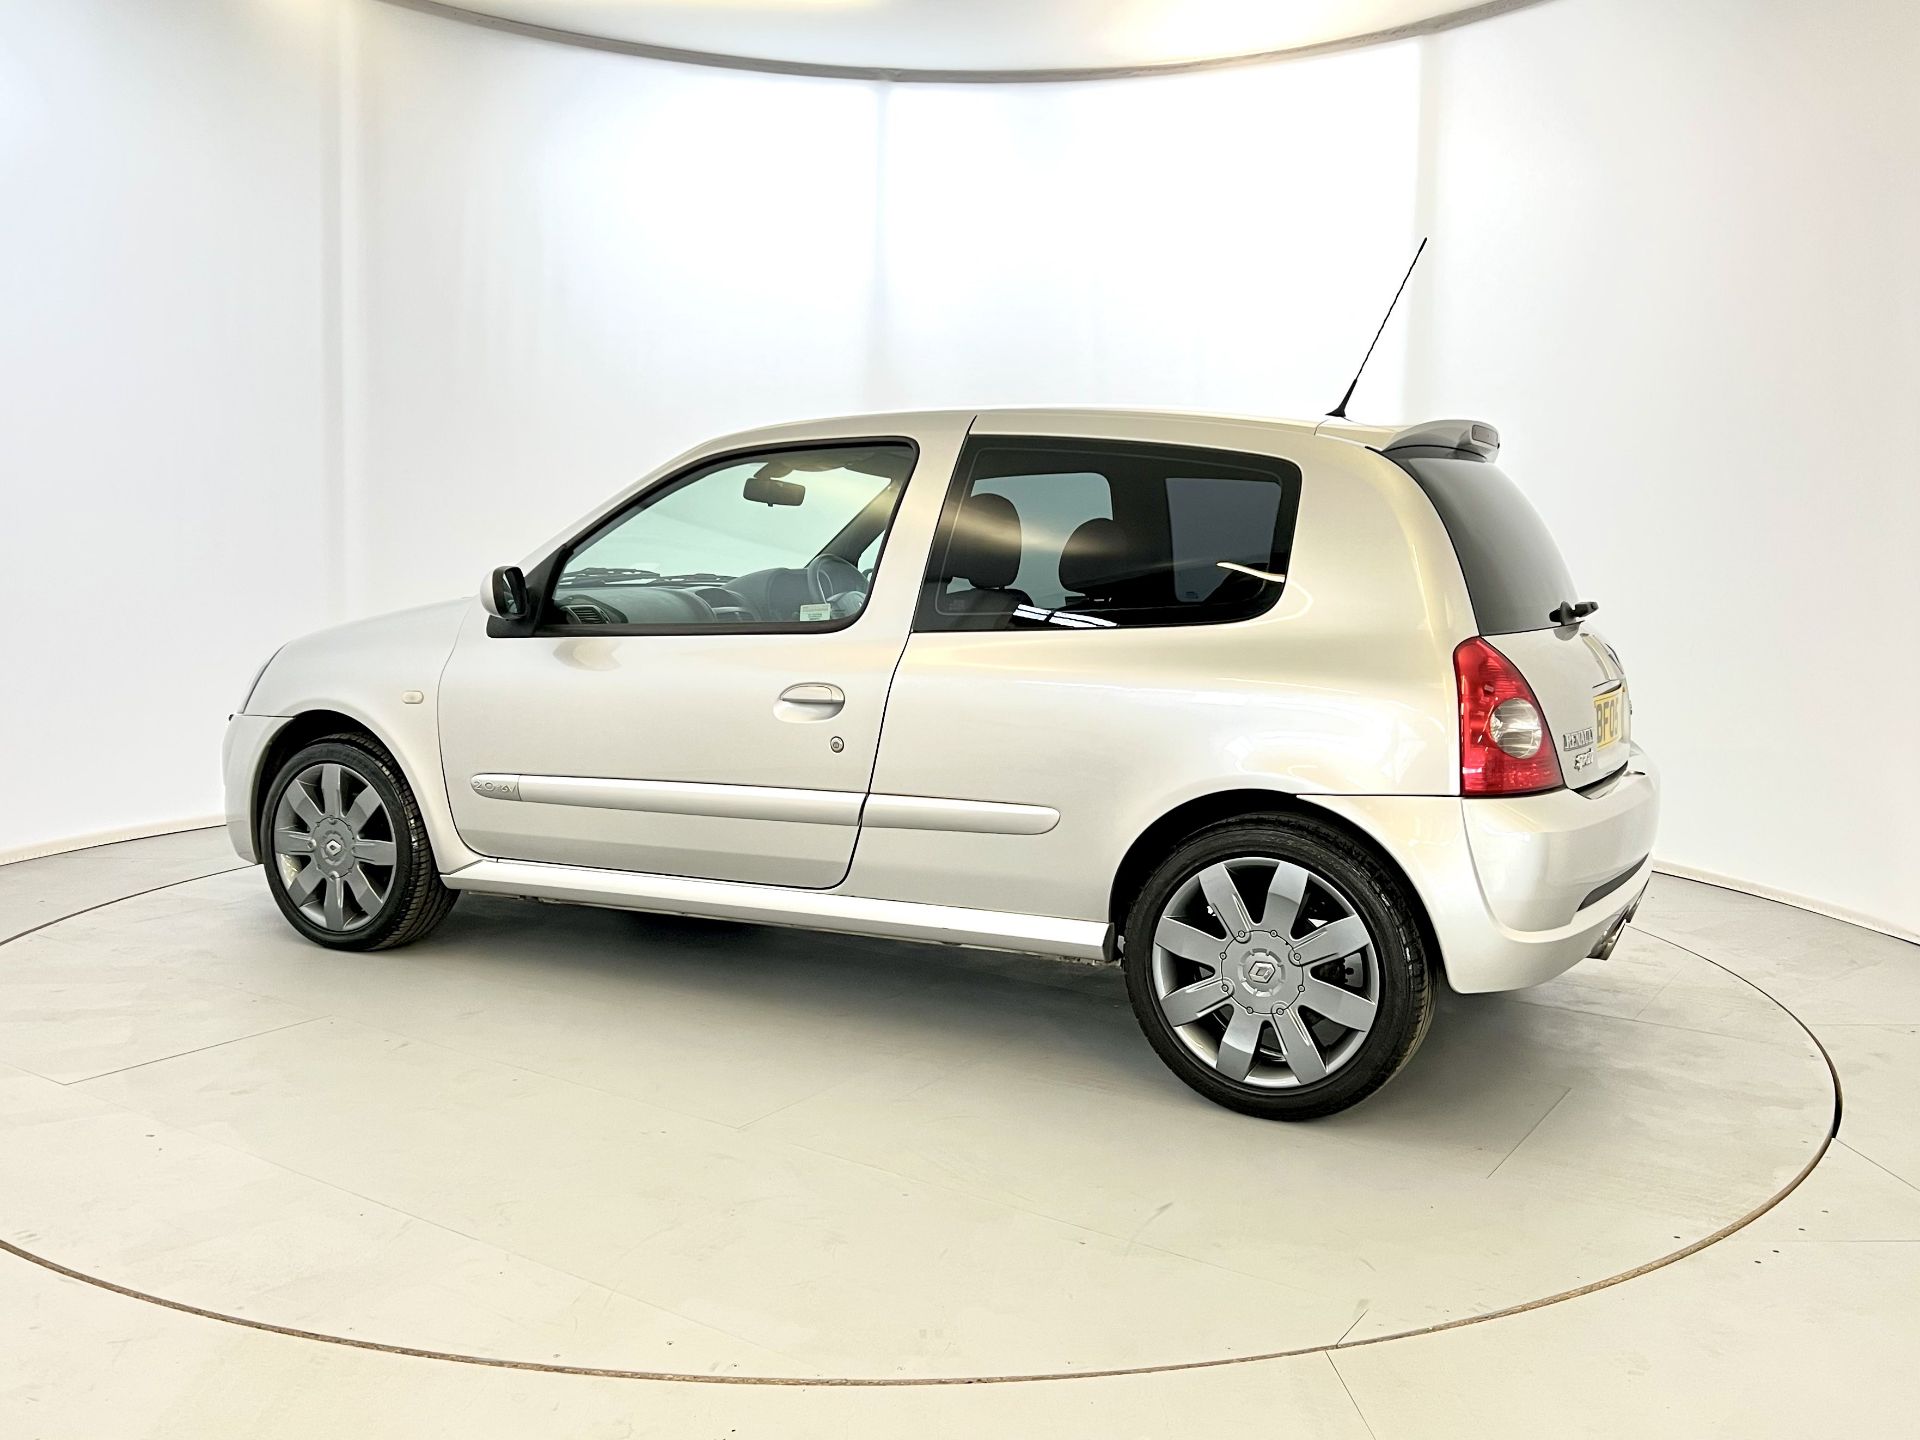 Renault Clio 182 Cup - Image 6 of 31